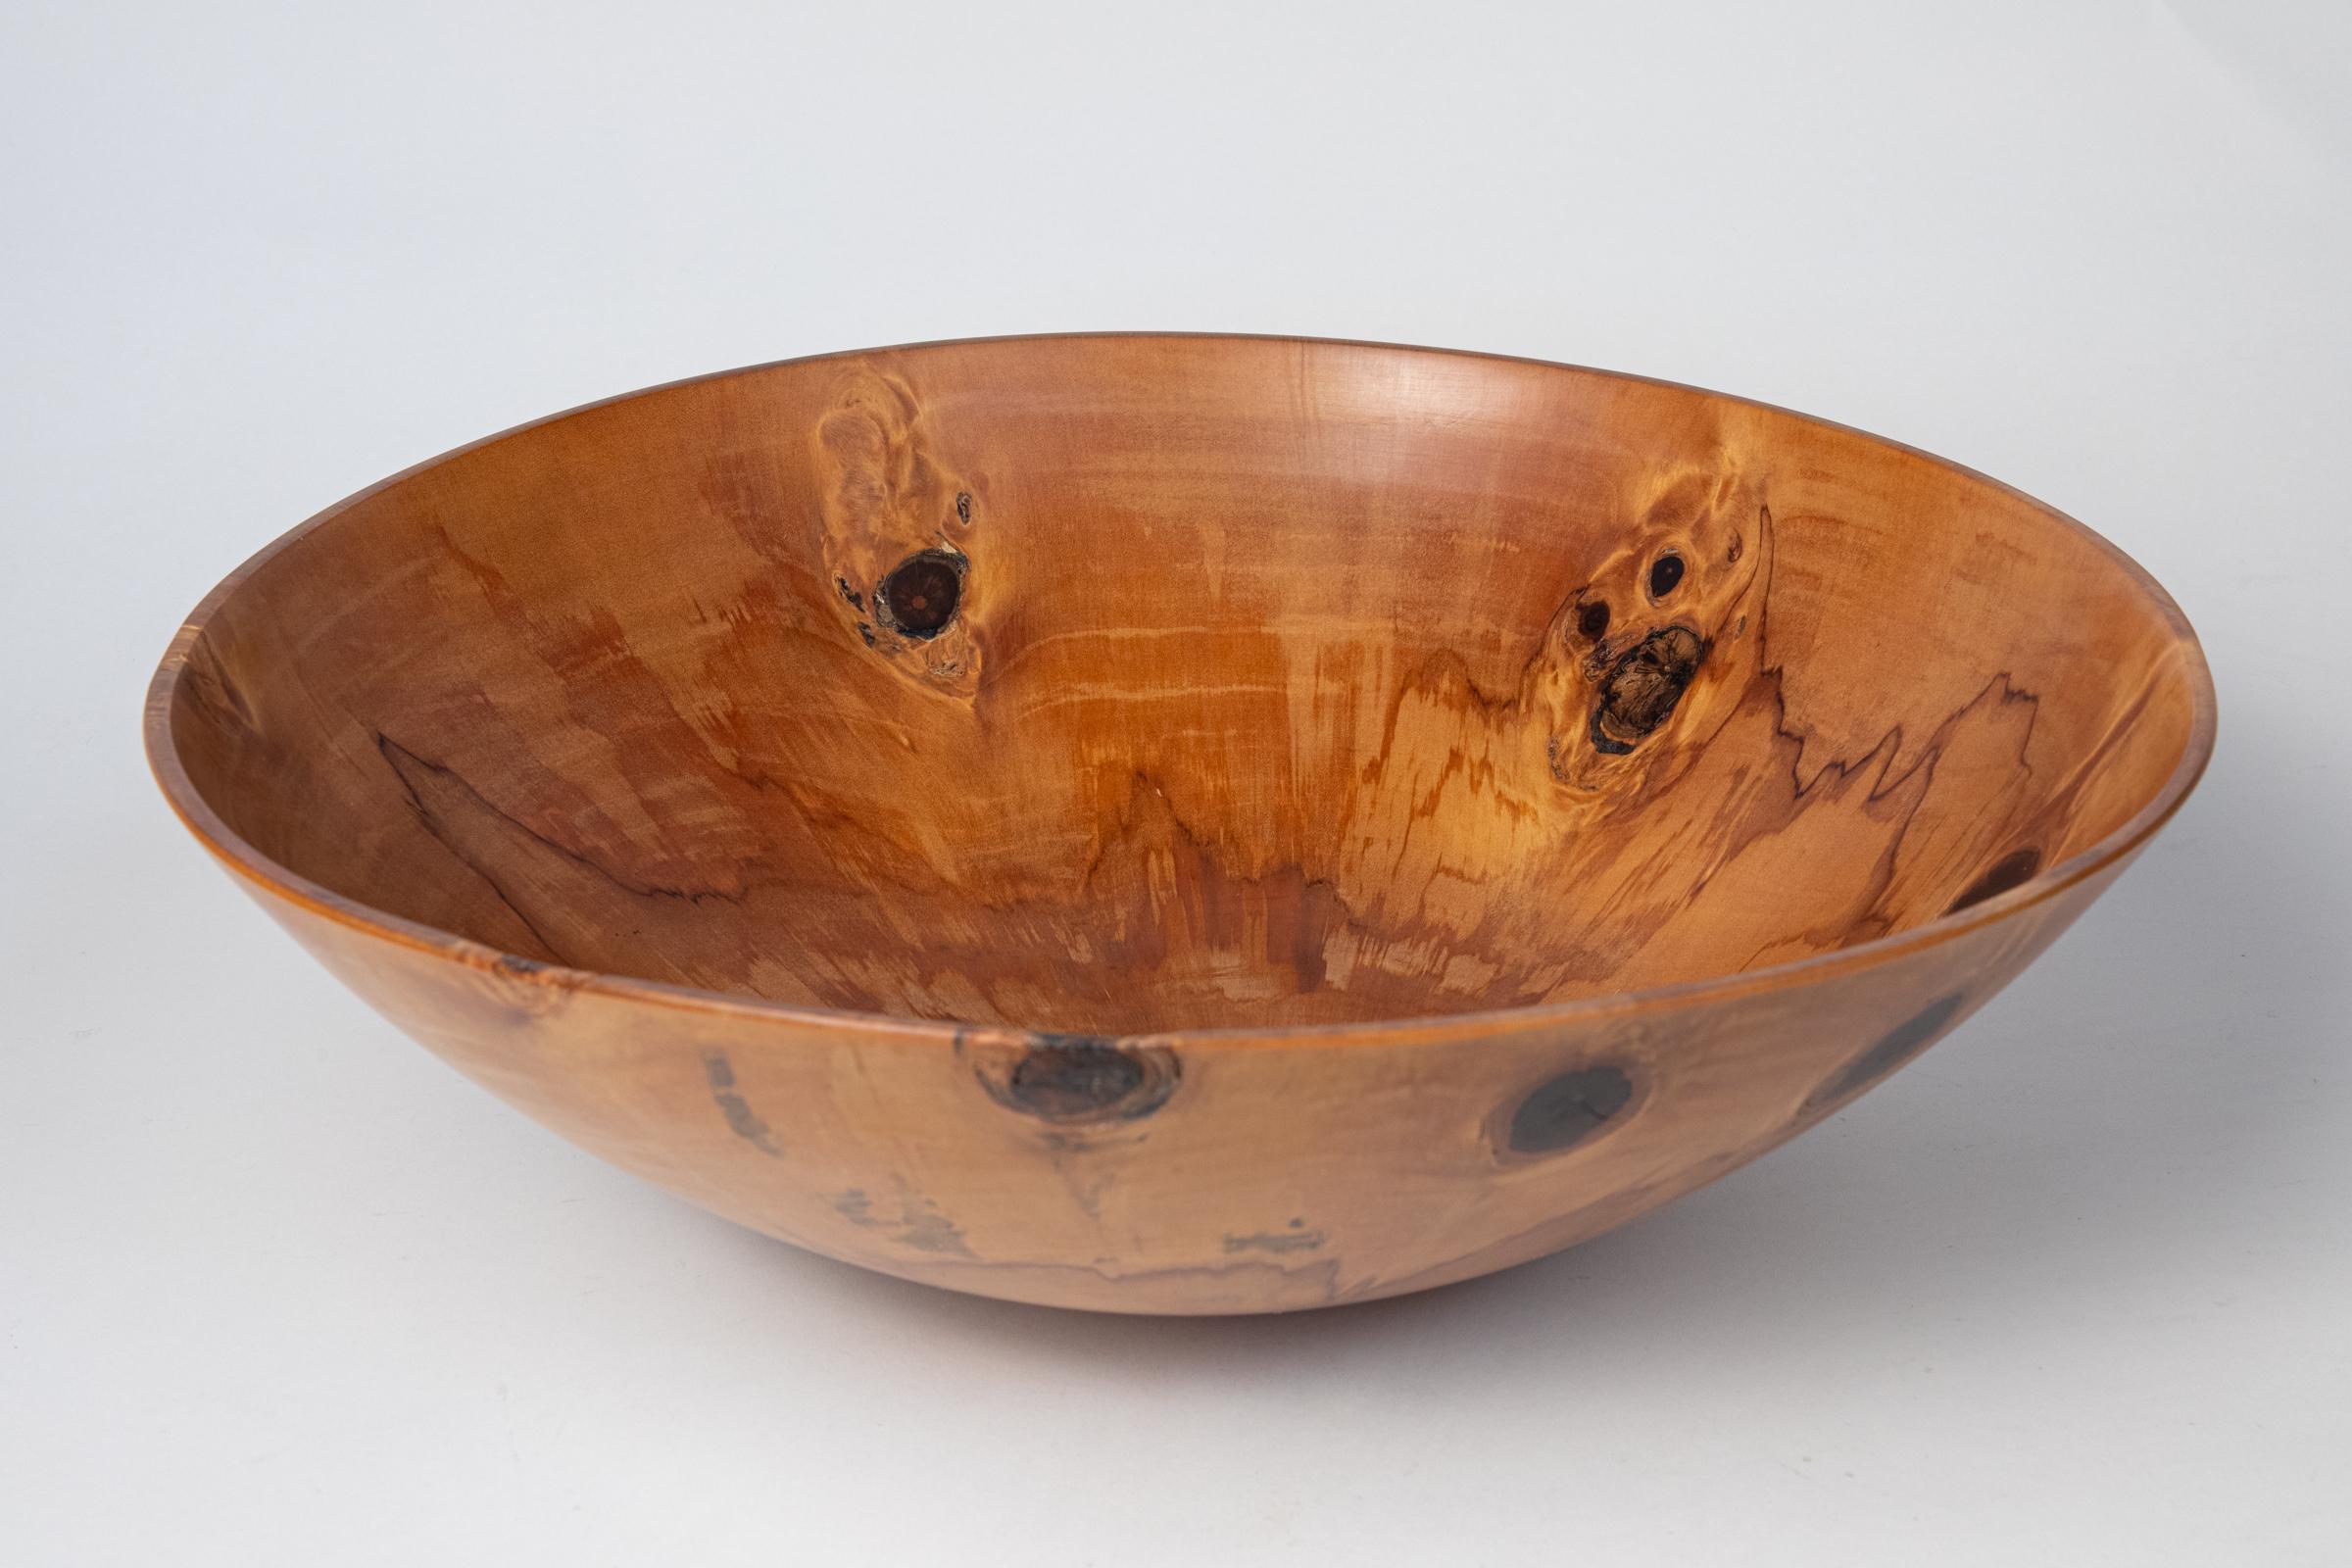 Expertly crafted large Norfolk Pine turned wood bowl by Hawaiian artist/craftsman Syd Vierra. Singed and dated from 2003 on base as pictured. Quite large at about 16.25